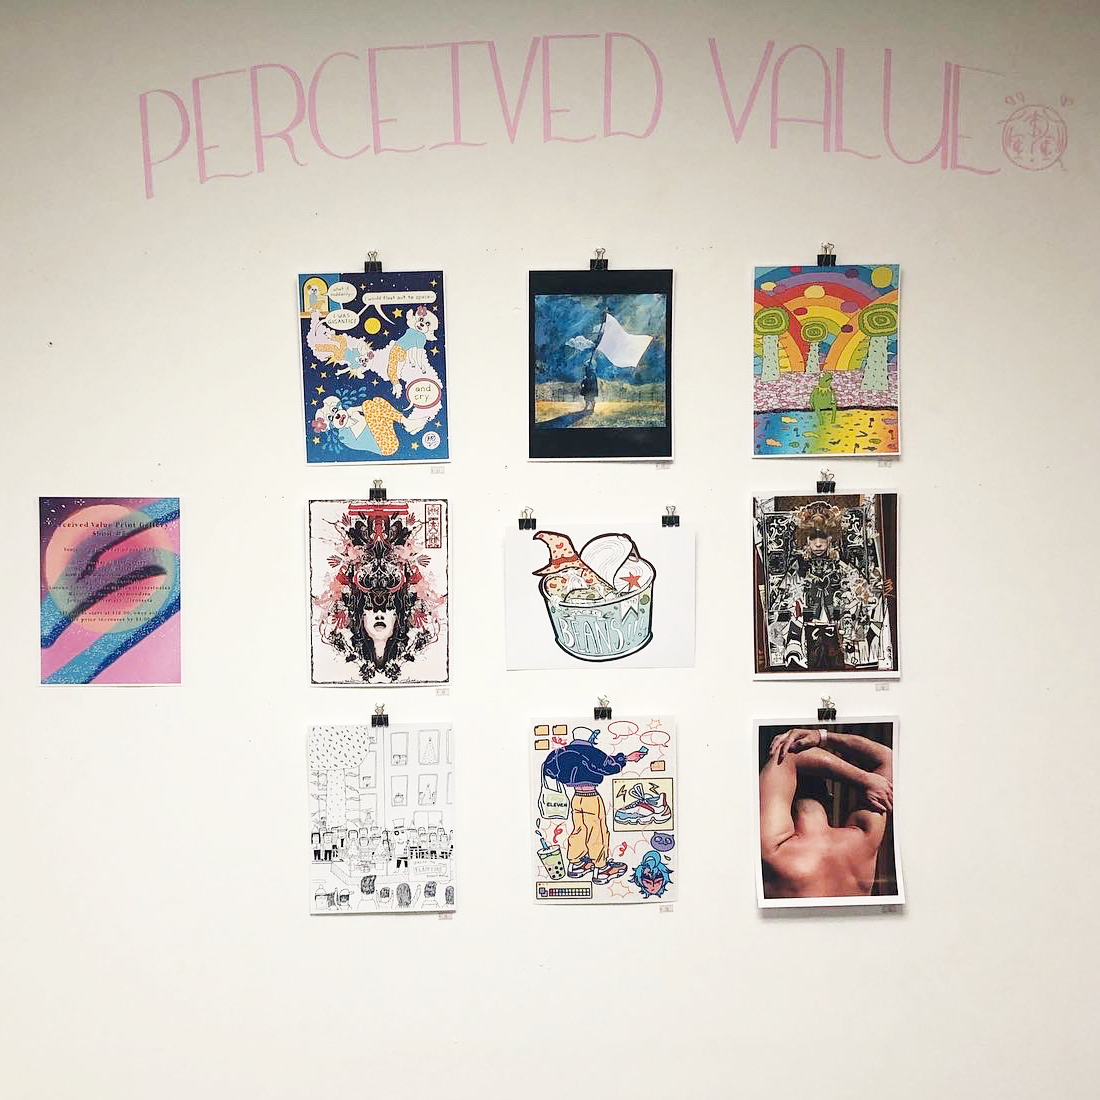 Perceived Value Prints gallery show